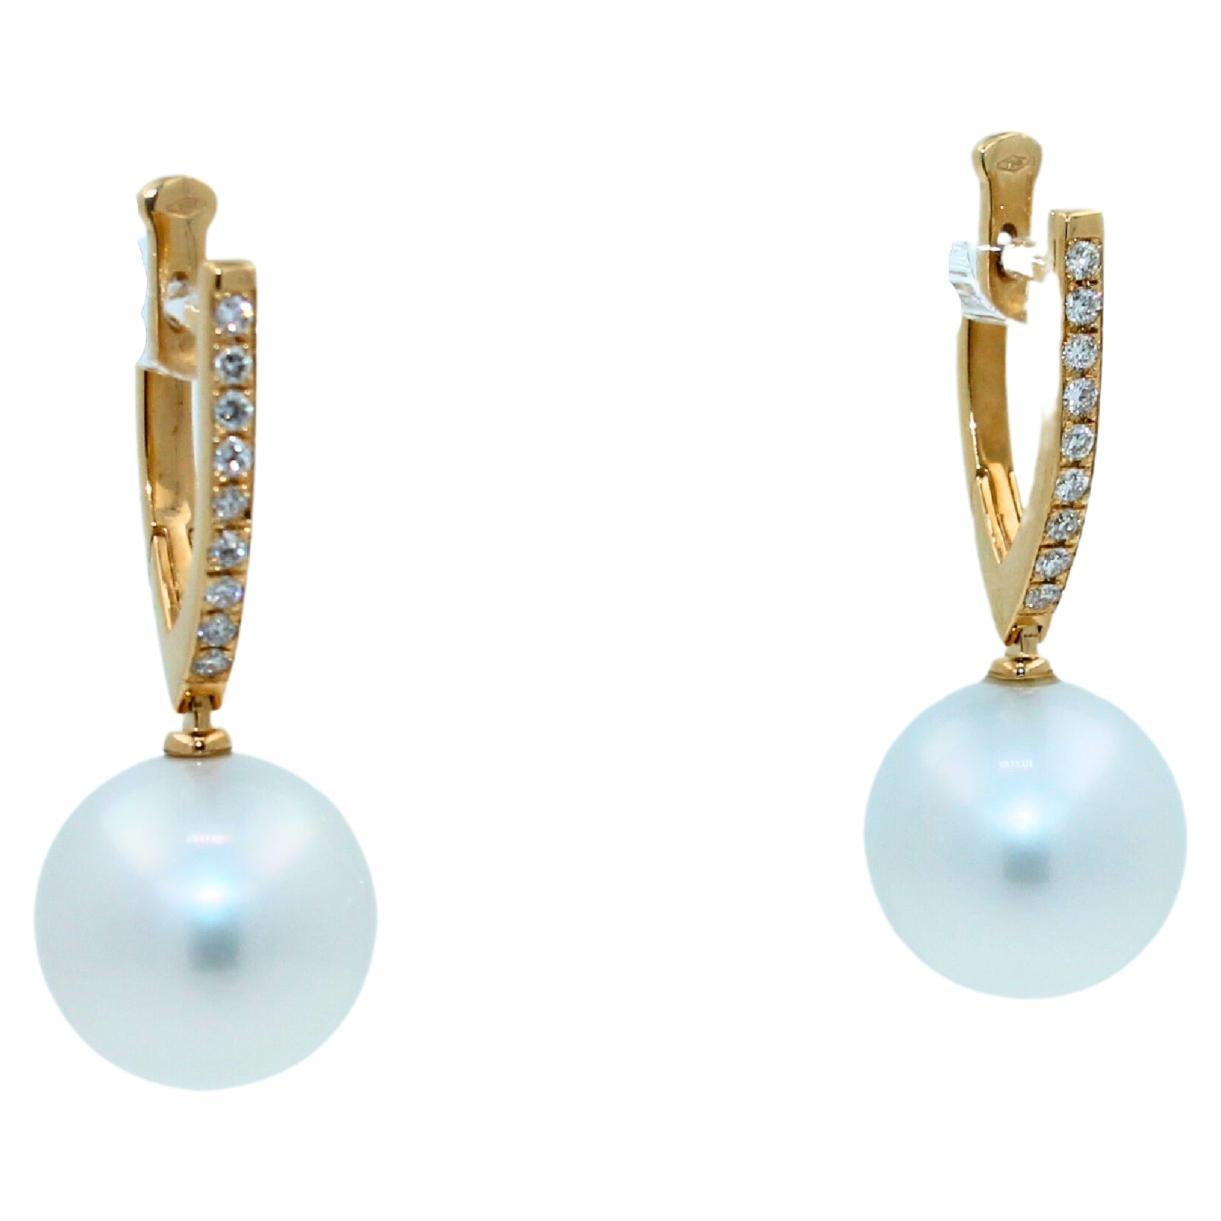 White AAA Quality South Sea Pearls
Striking Silvery Hue with Light Blue Iridescent  Tones
Very Reflective Surface - Almost Mirror-Like 
Full Classic Sphere Shapes
14MM Round Diameter Size
12.5 Grams Total Weight
3.5 cm Full Length
0.50 cts Diamonds